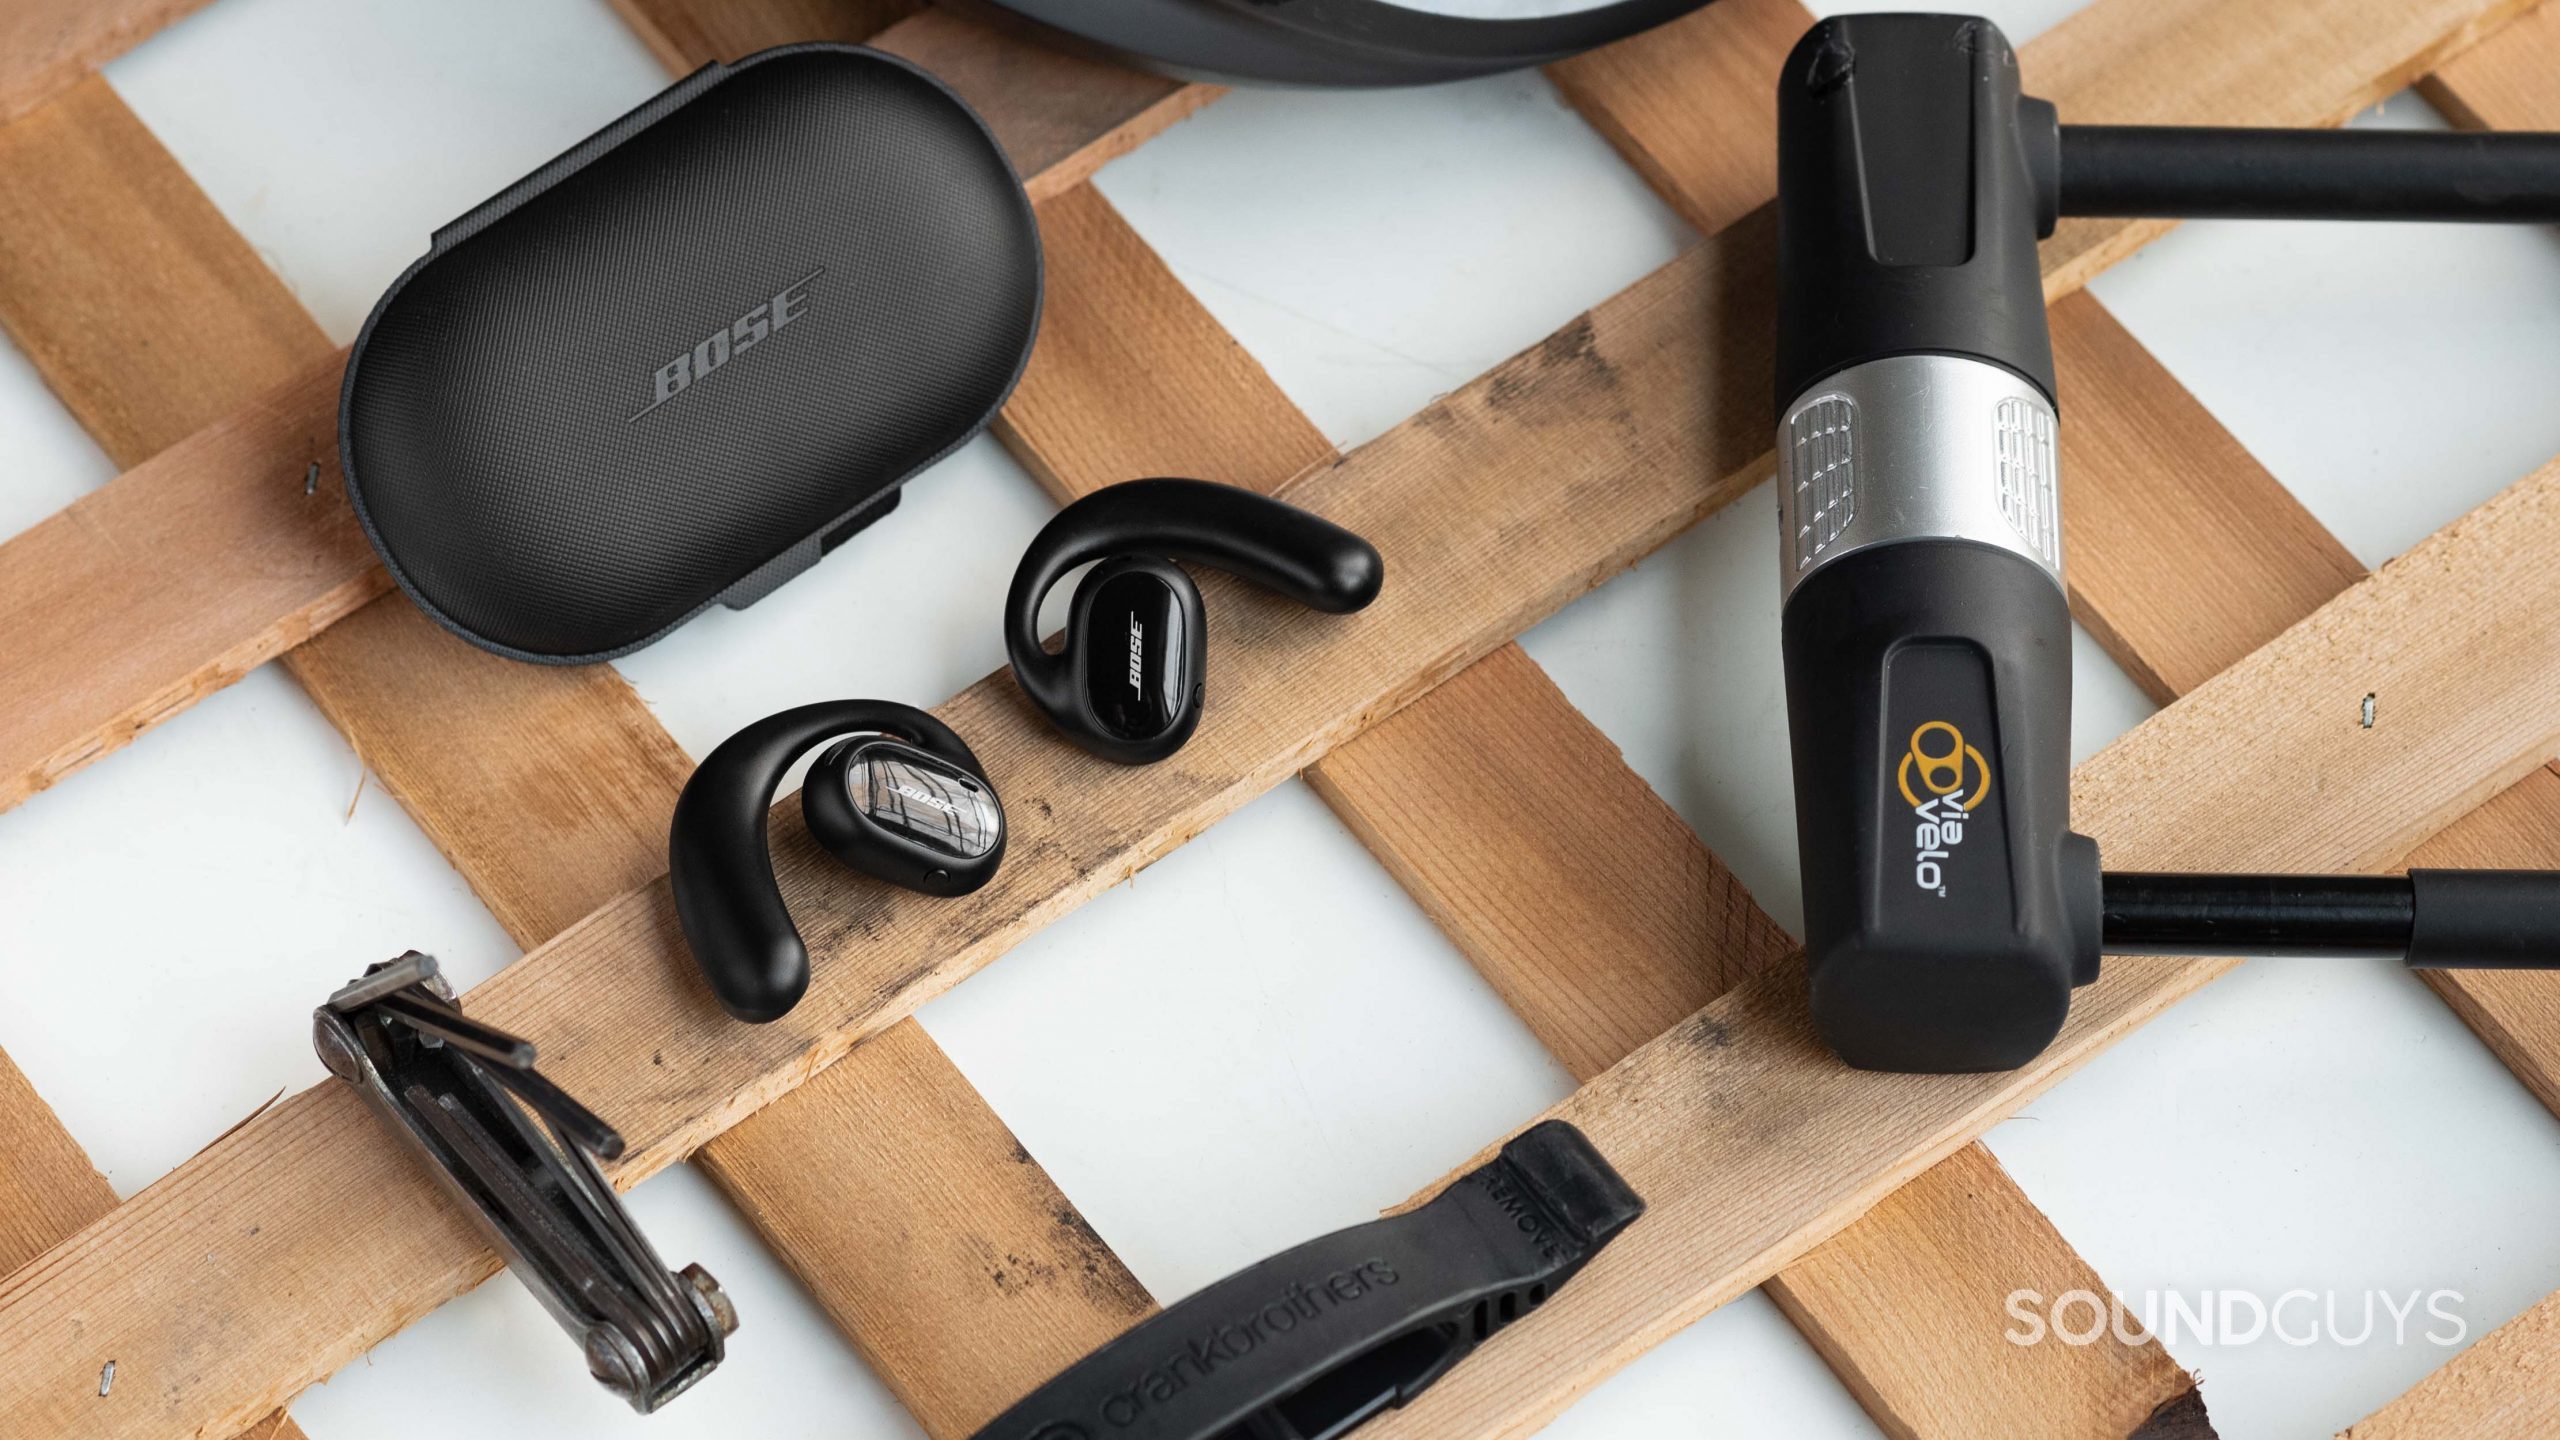 The Bose Sport Open Earbuds outside of the closed carrying case and surrounded by bike tools.